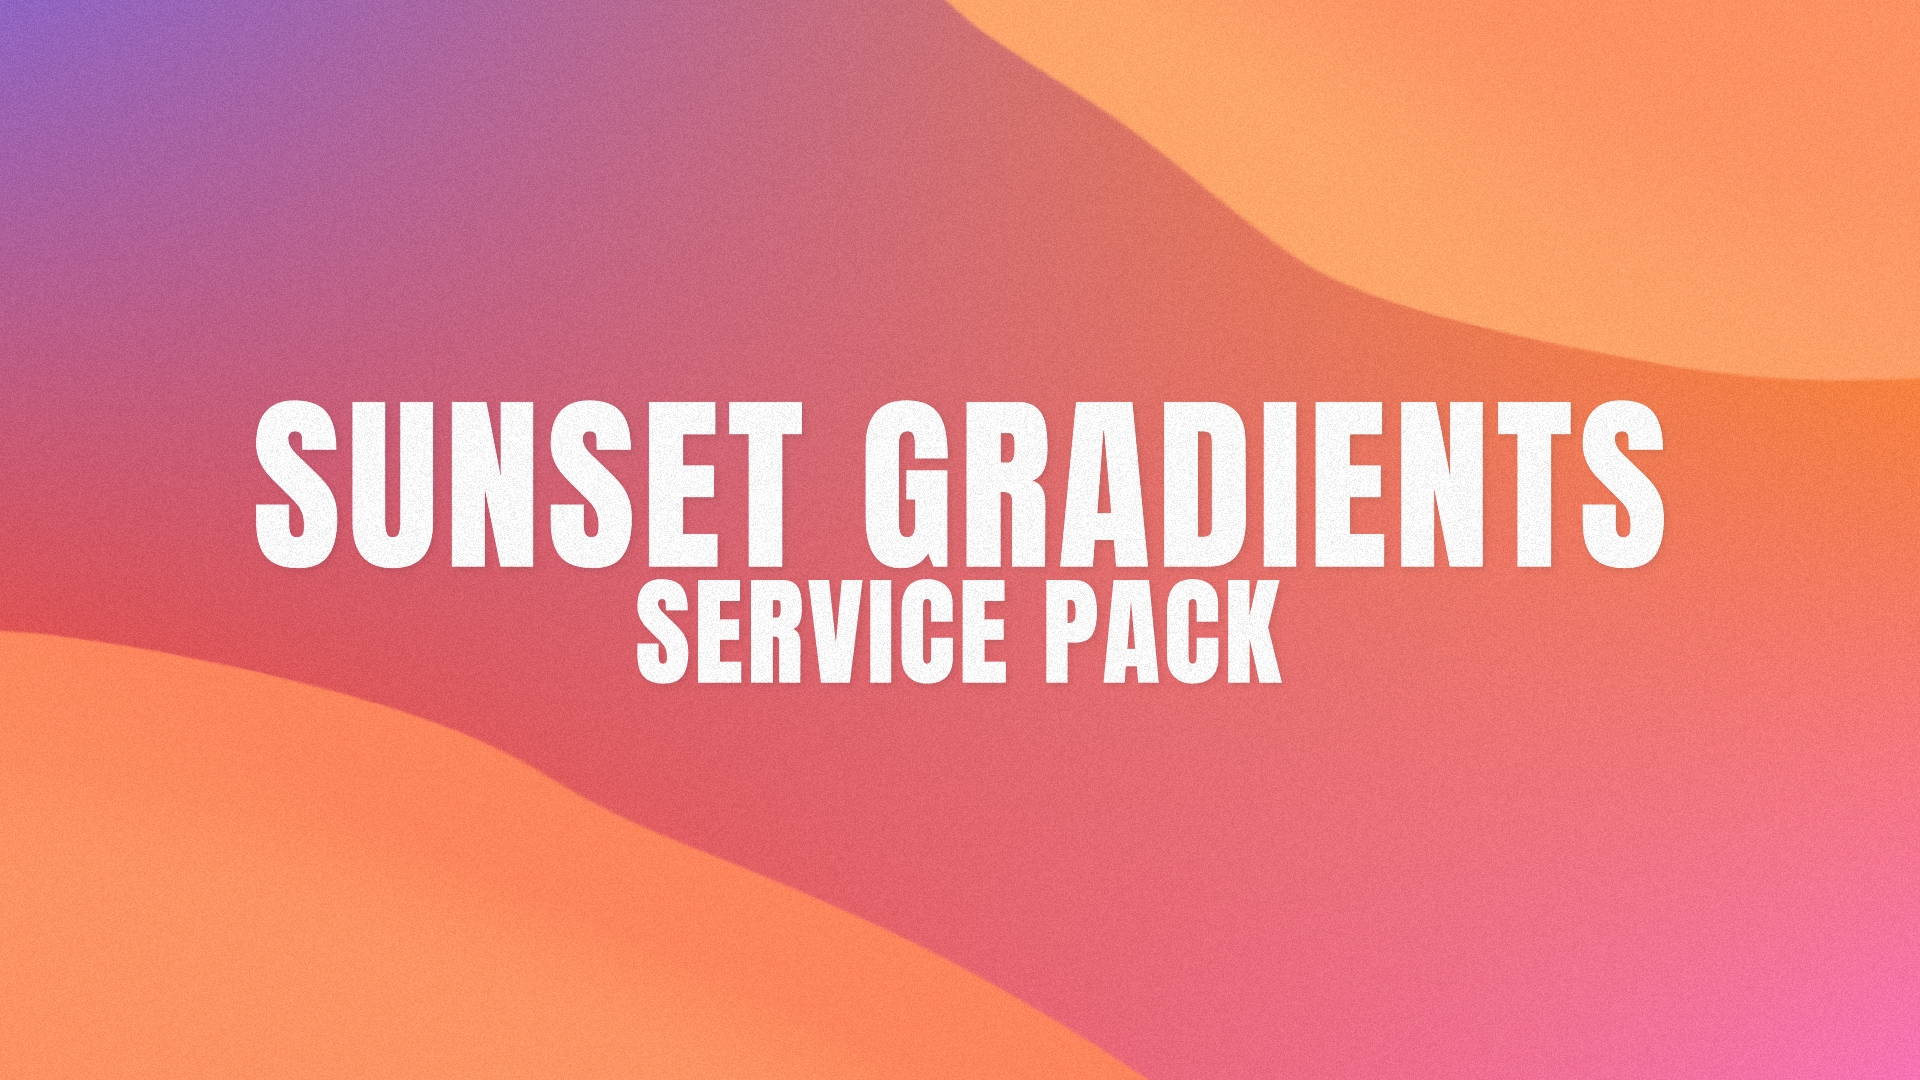 Sunset Gradients Service Pack